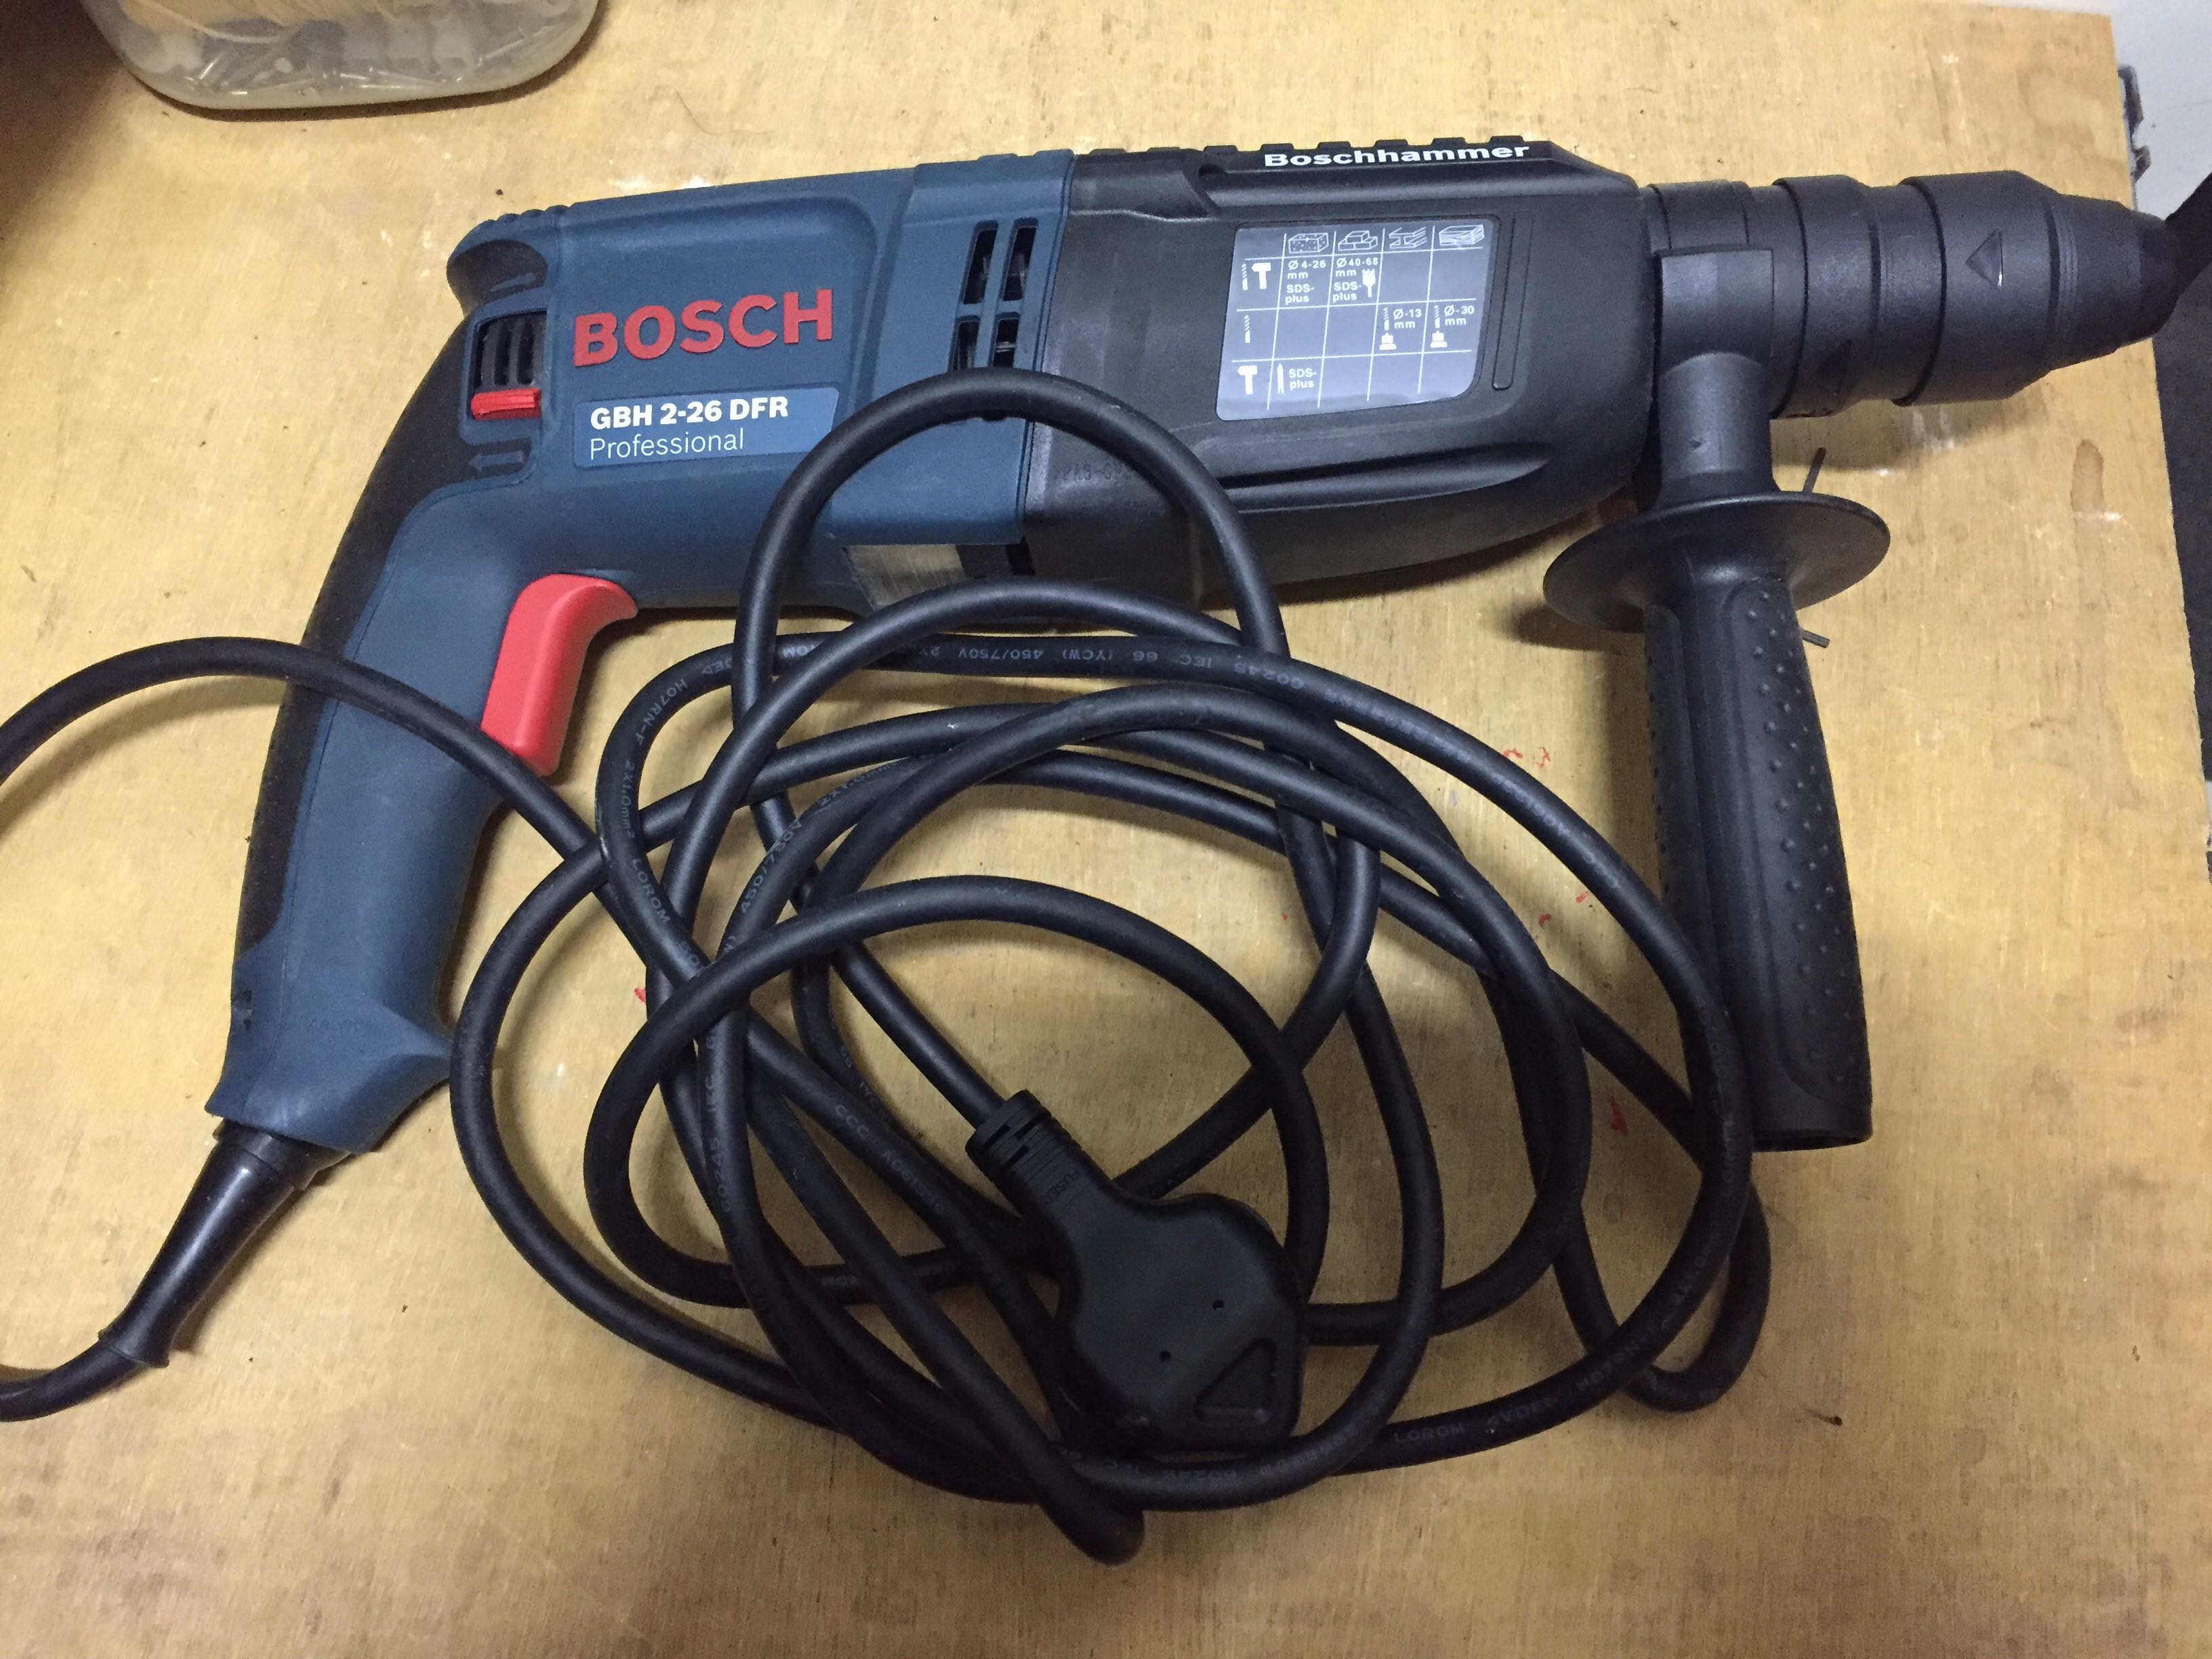 (new) bosch rotary hammer gbh 2-26dfr solo